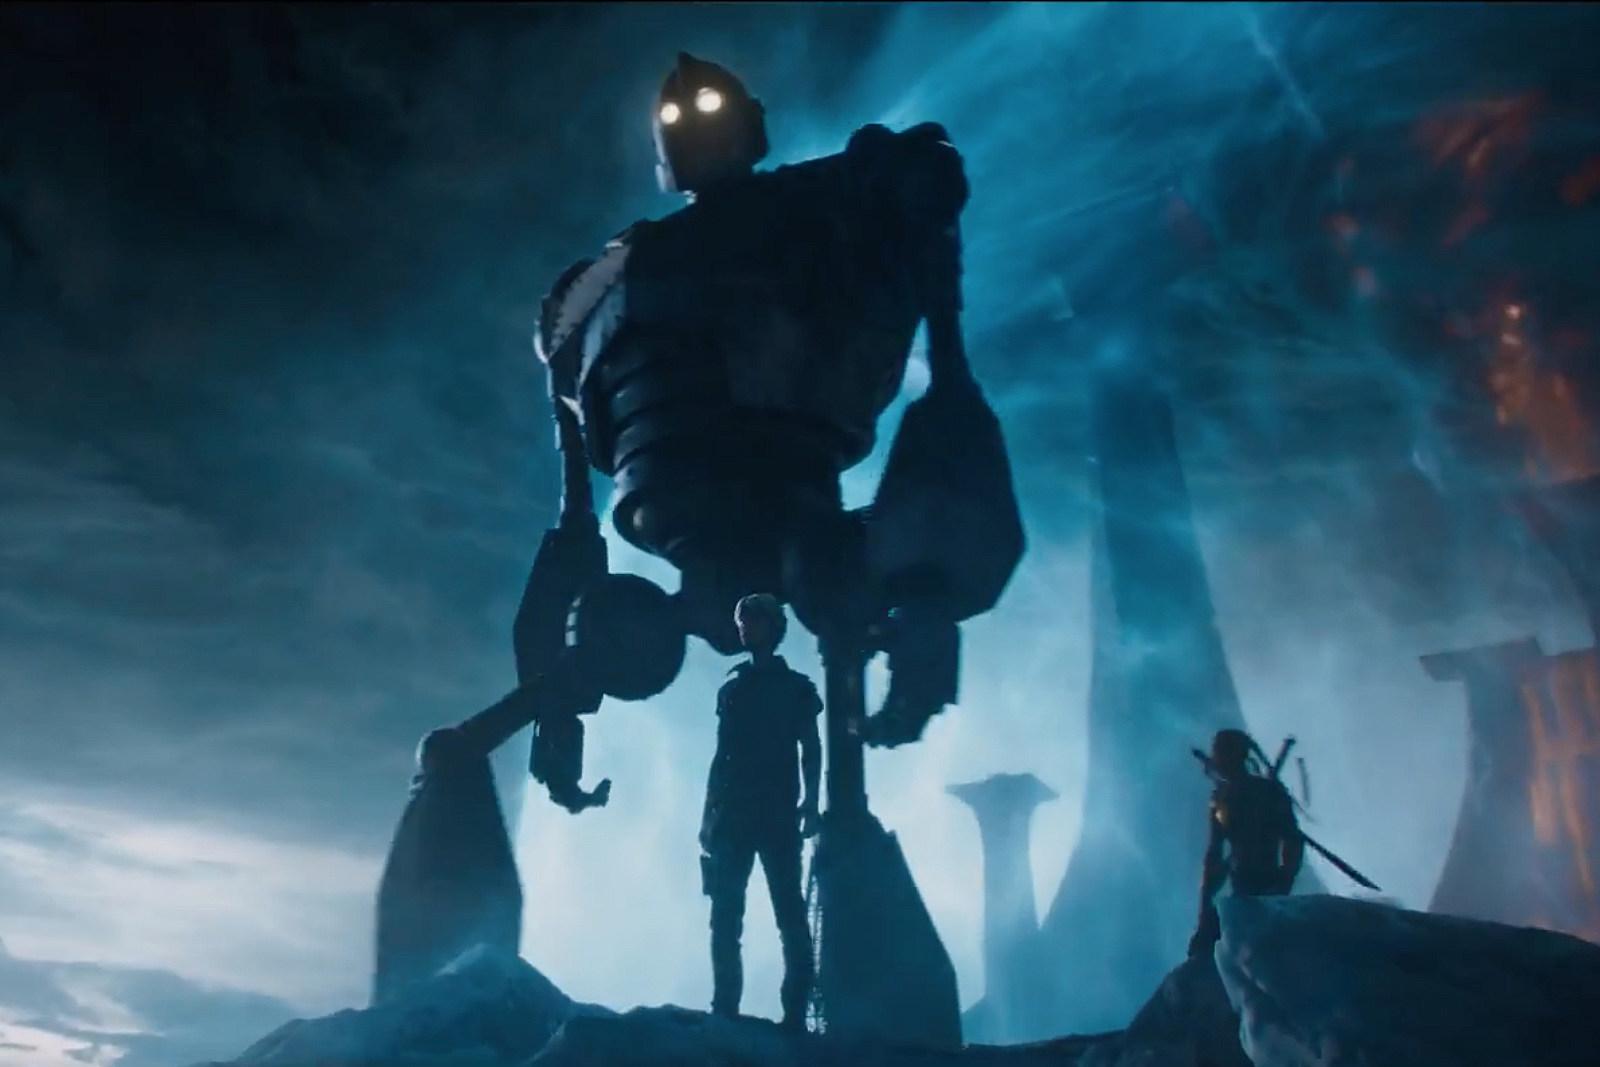 Ready Player One: watch the new trailer - Polygon